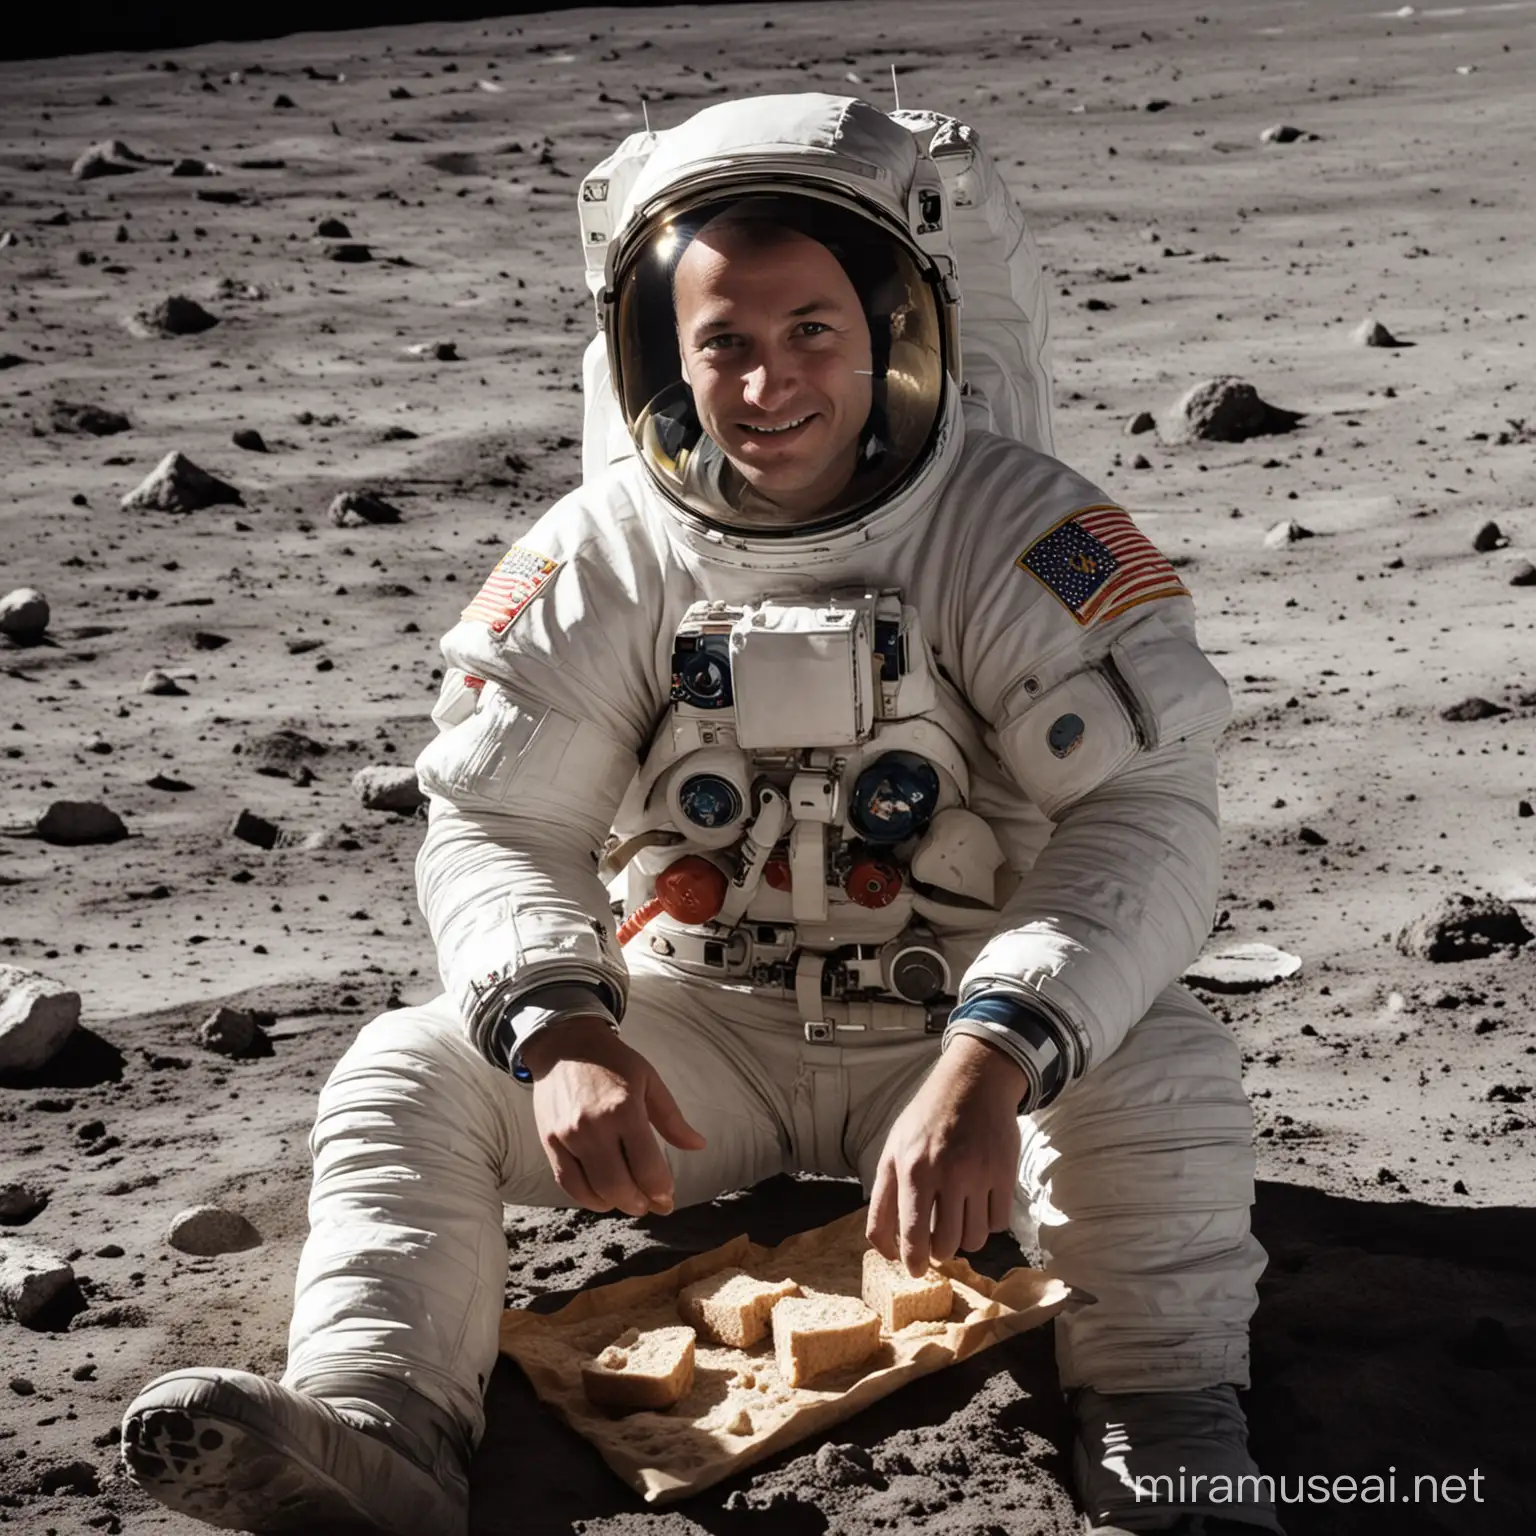 astronauts are sitting on the moon and they have bread and meat in their hands